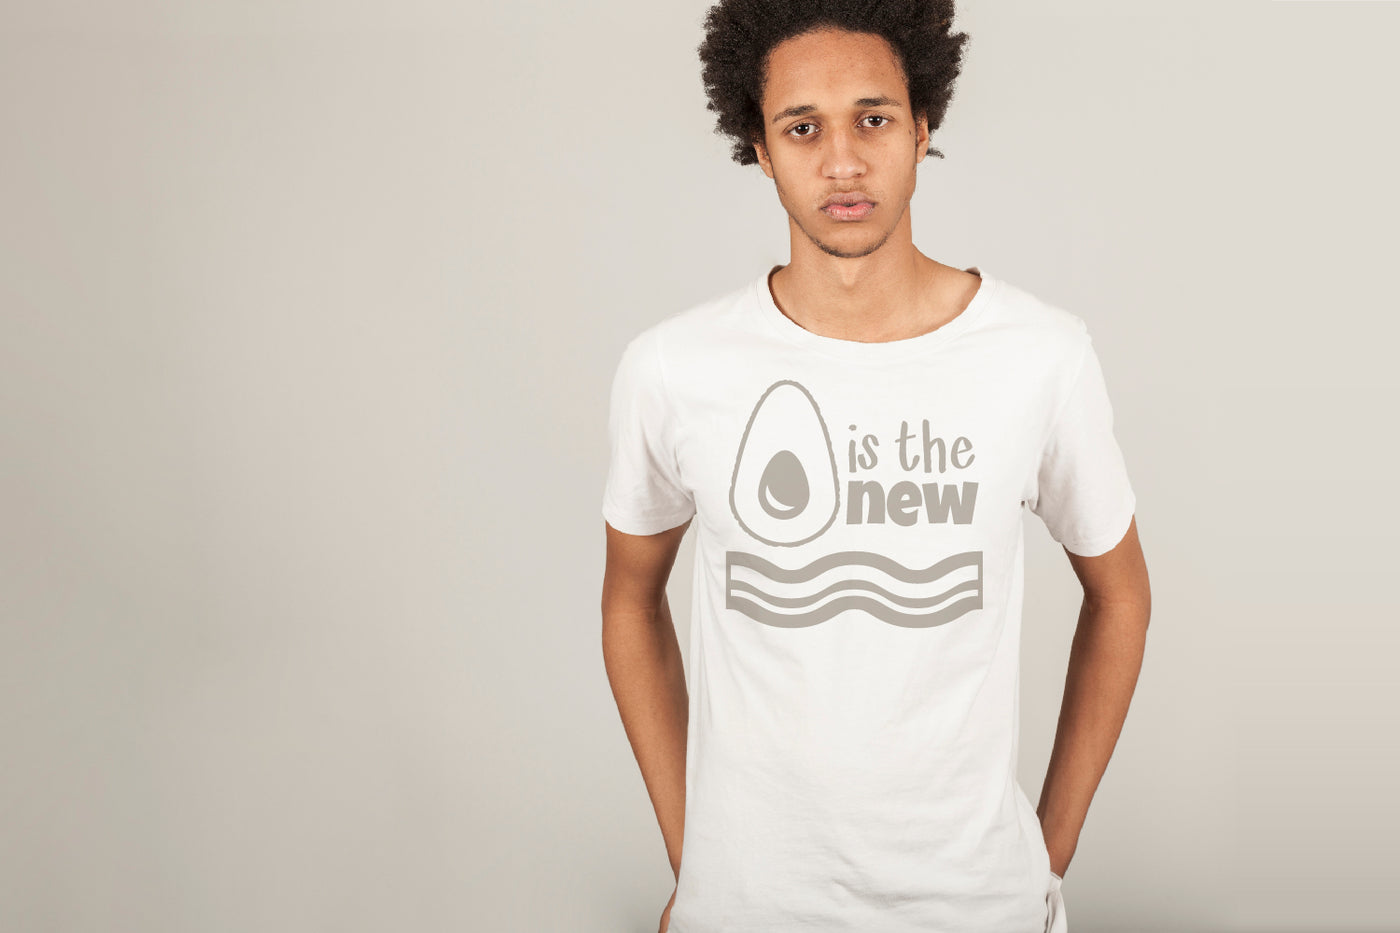 A black man wears a white tee with an image of an avocado and some bacon to be read as "Avocado is the new bacon." The design is in grey. He stands against a pale grey wall.